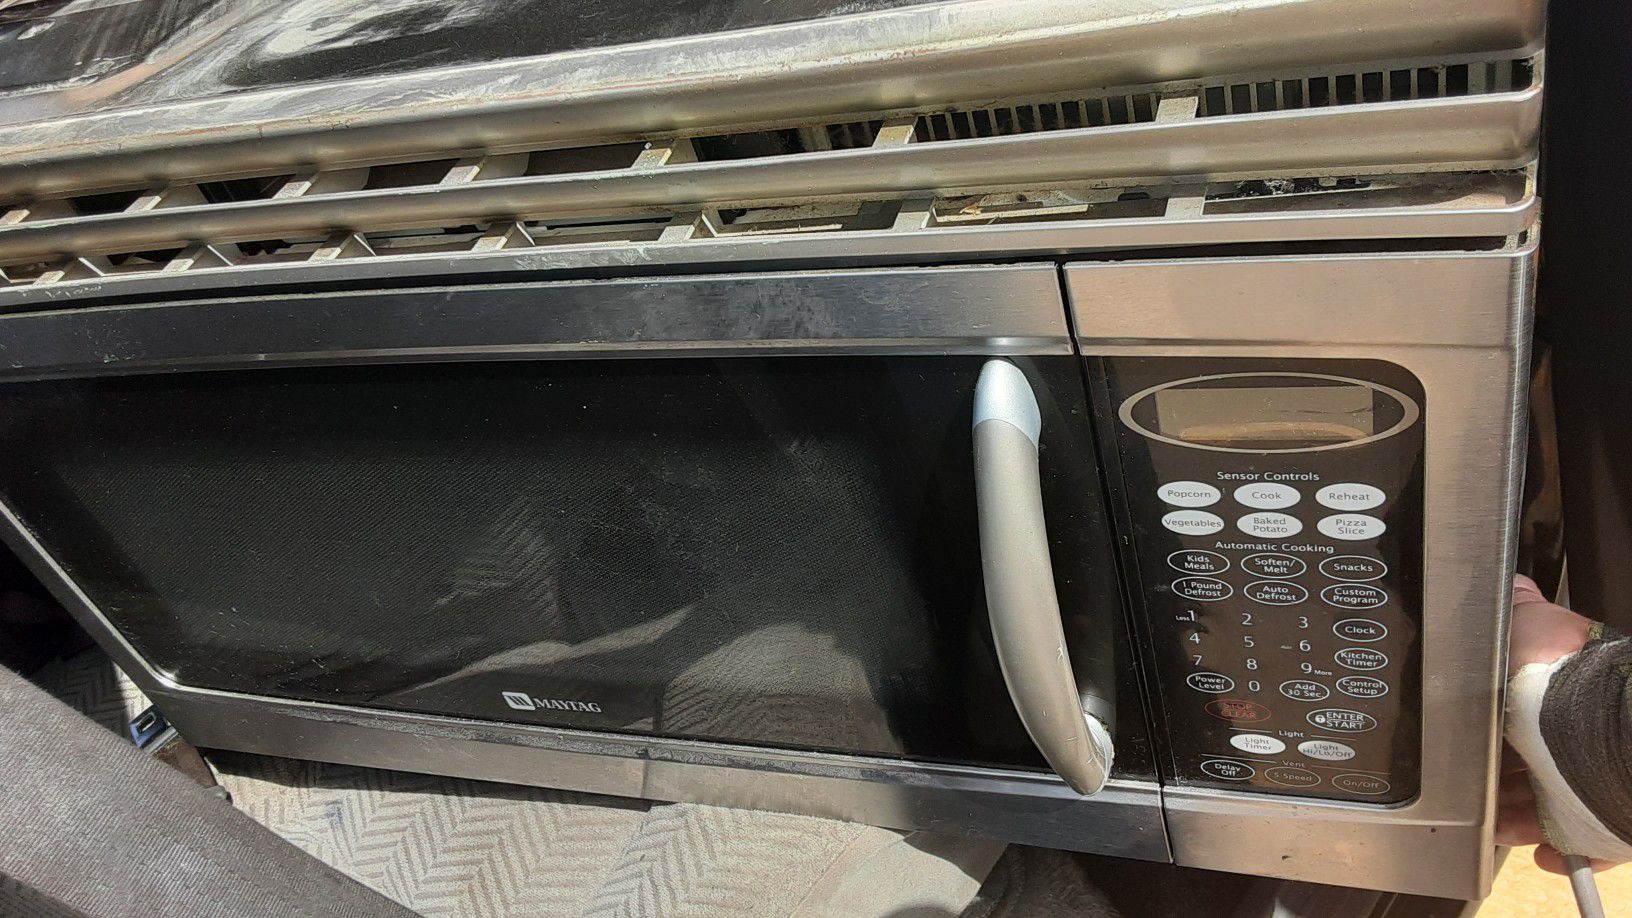 Maytag under counter microwave